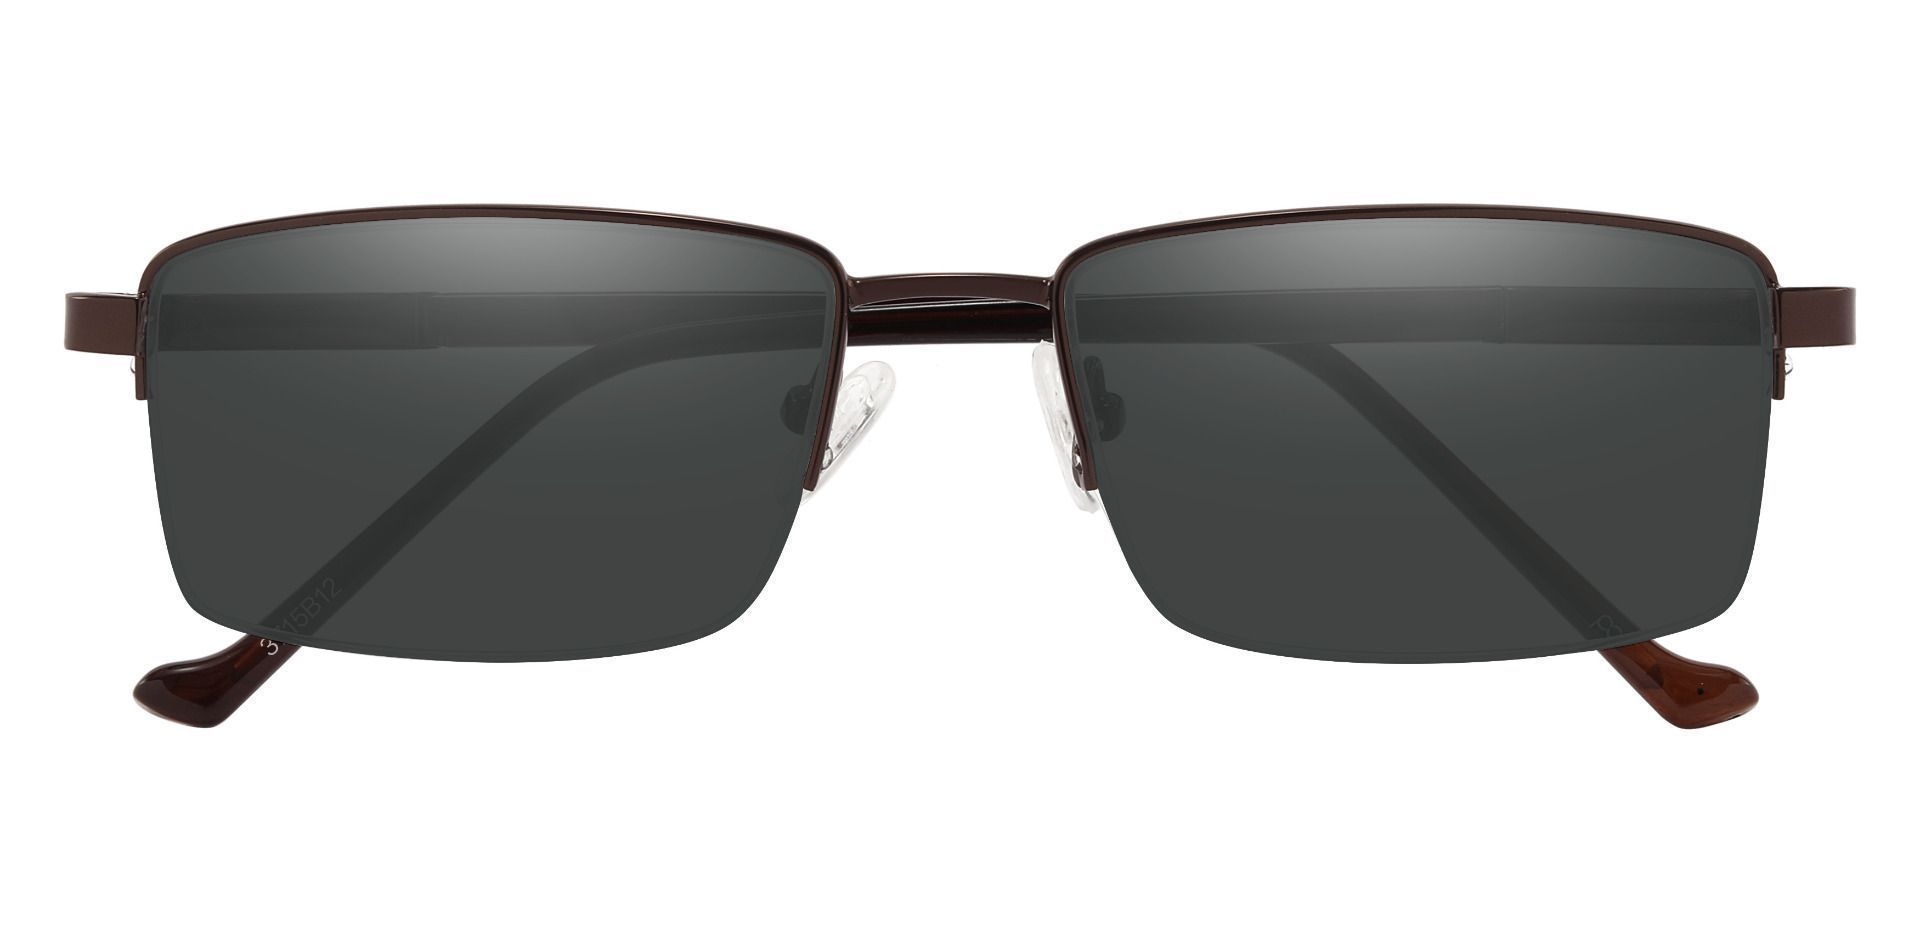 Jacques Rectangle Prescription Sunglasses - Brown Frame With Gray Lenses